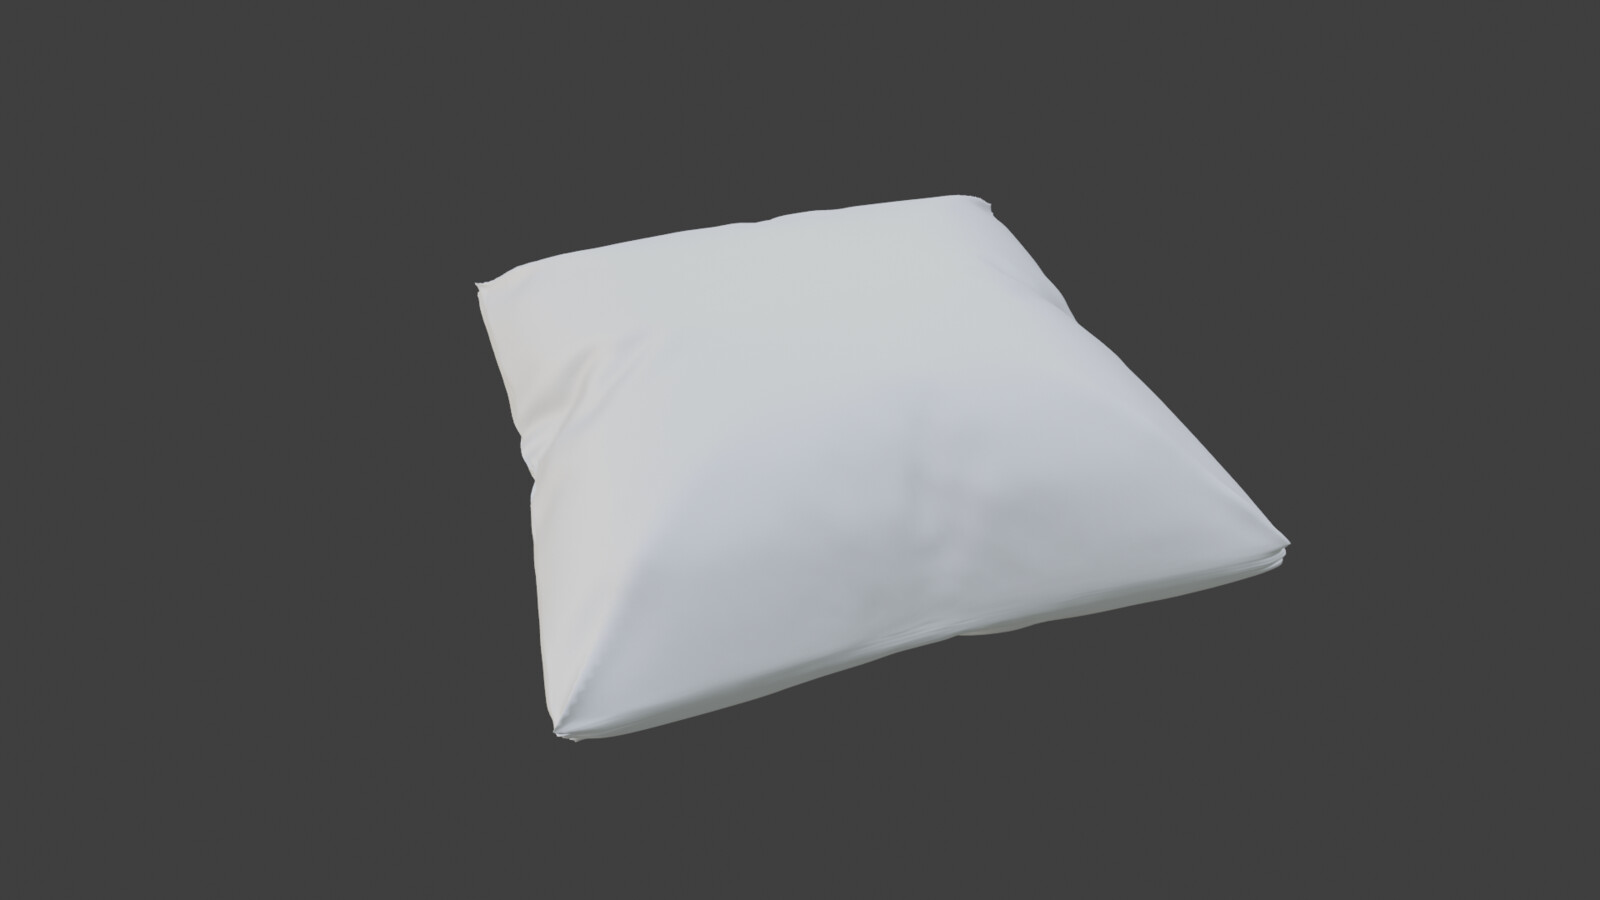 I made this pillow by using cloth simulation in Blender.